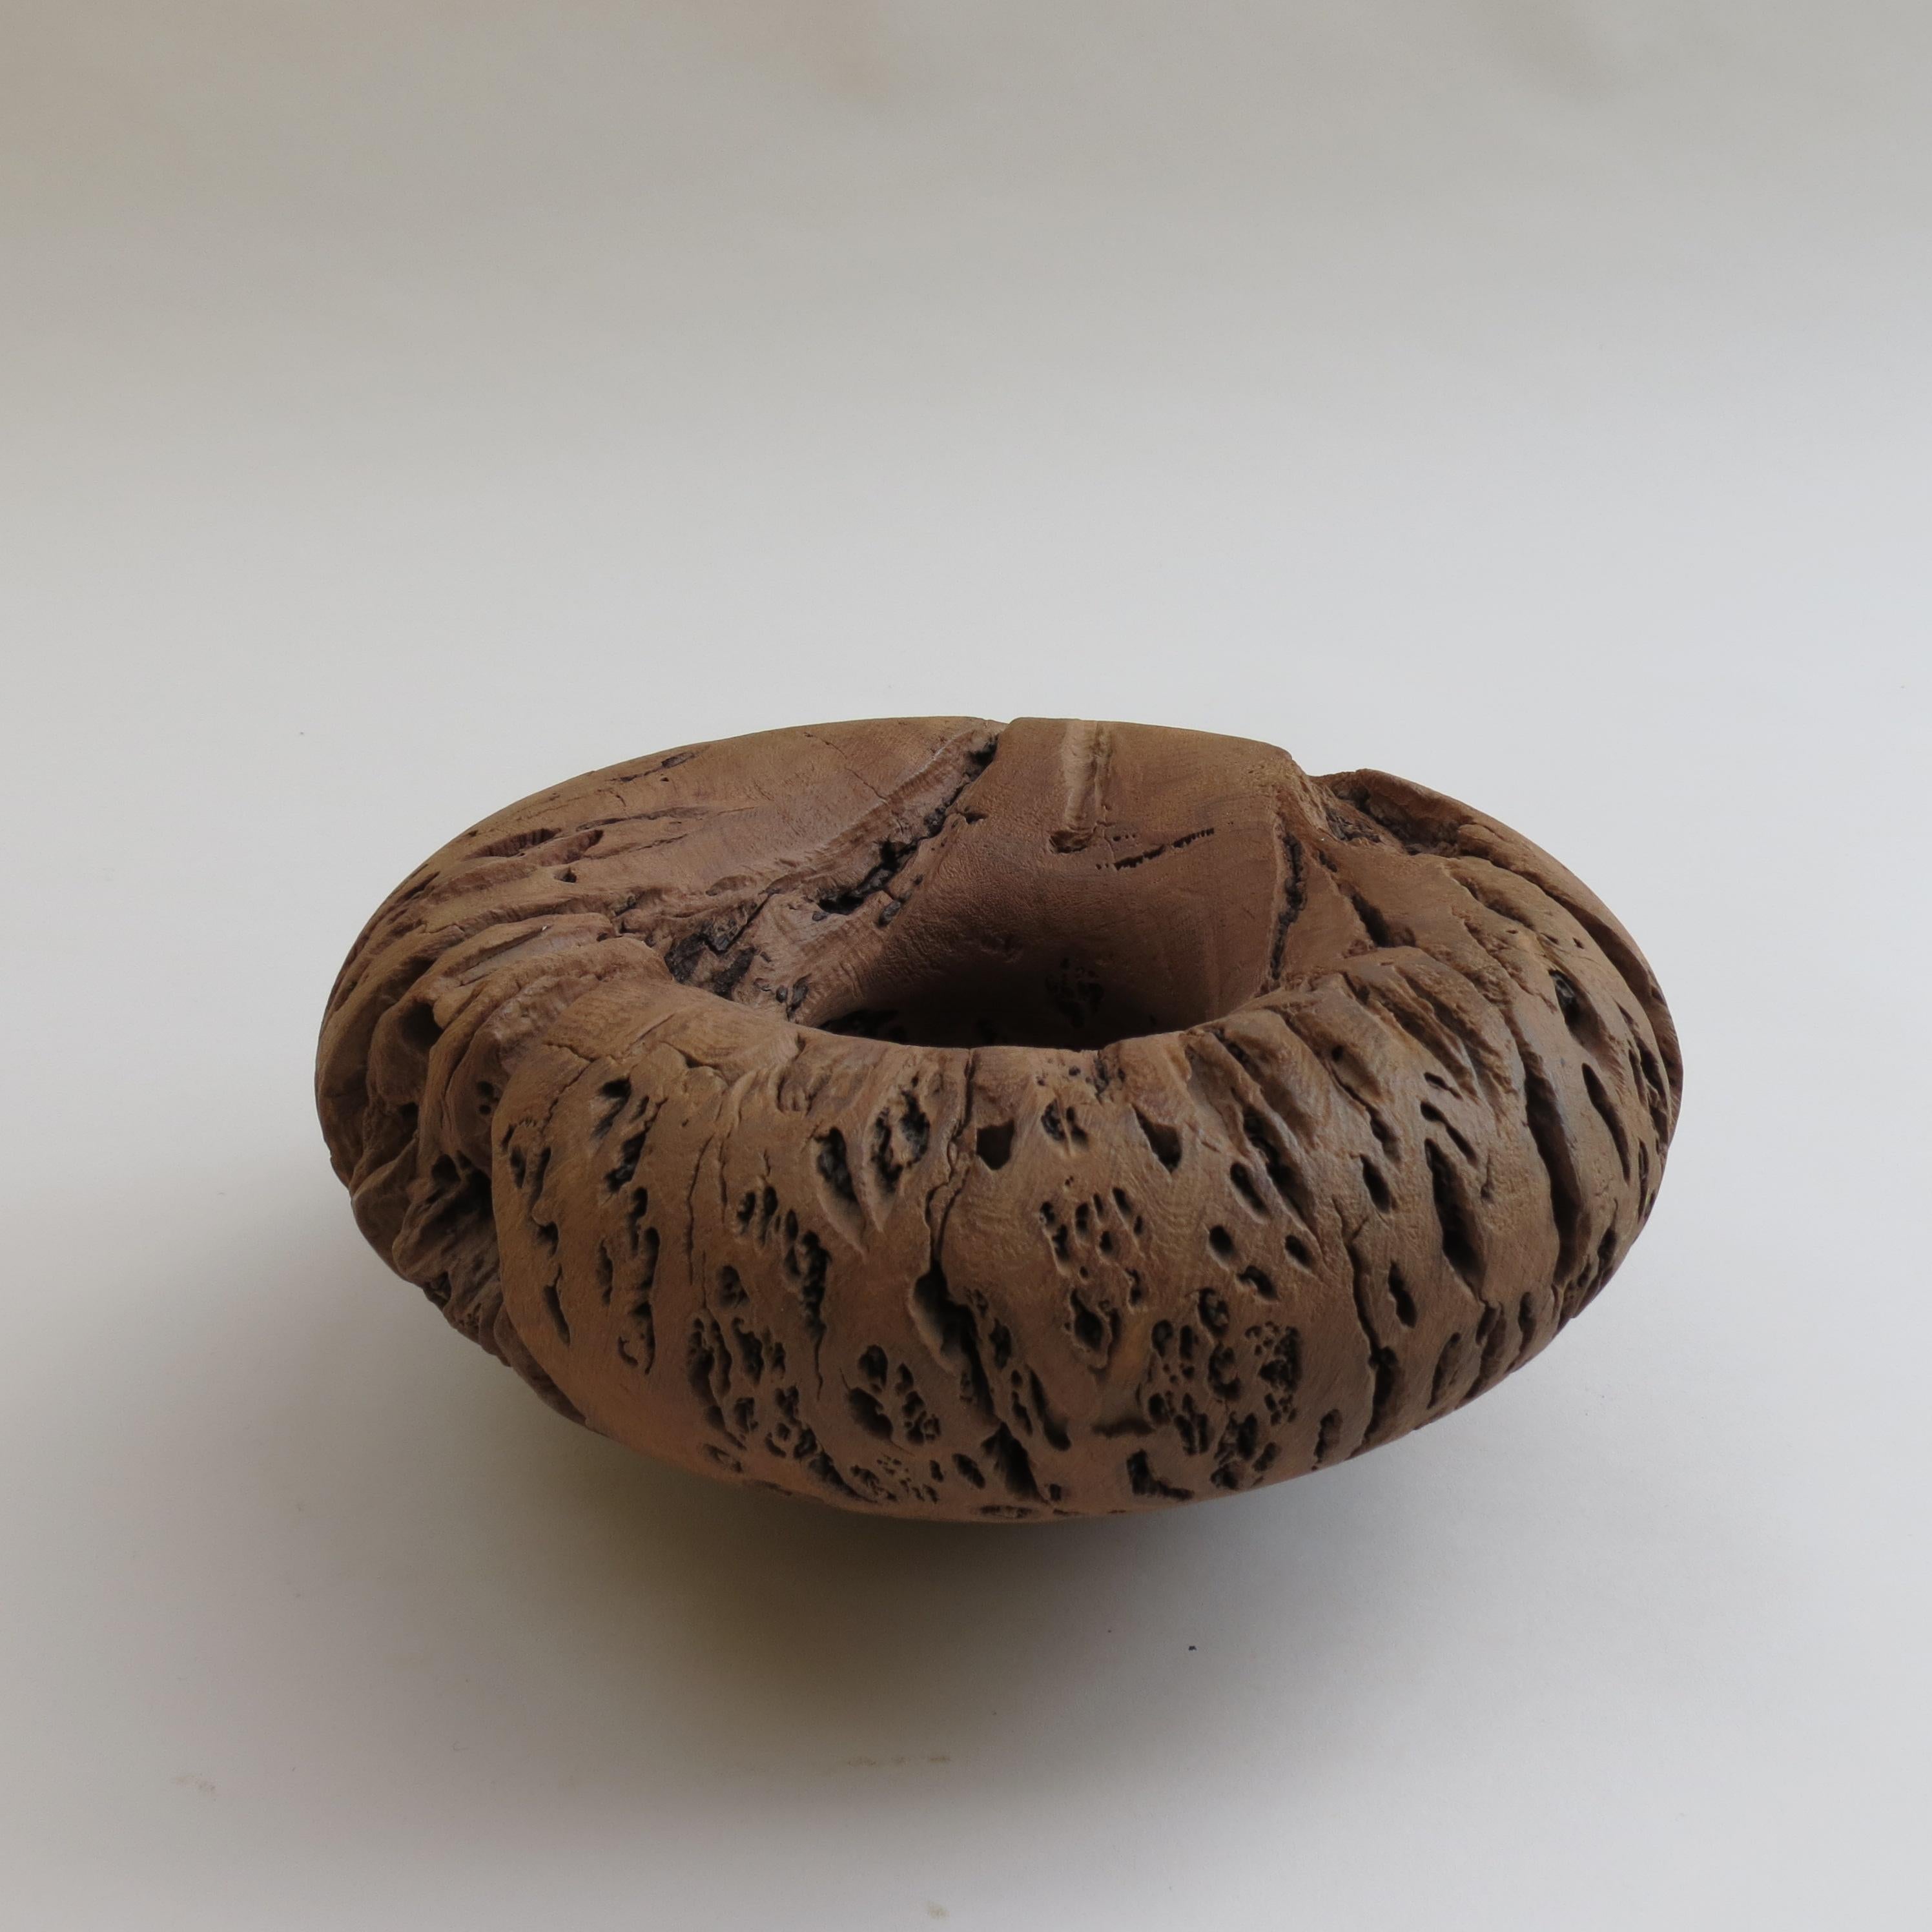 Vintage hand-turned wooden bowl made from Tasmanian burr oak, a heavy, a heavy wood. Wonderful shape and texture. The grain has been brushed to emphasize the character of the wood and left natural. Produced by Mike Scott 'Chai'. Stamped to the